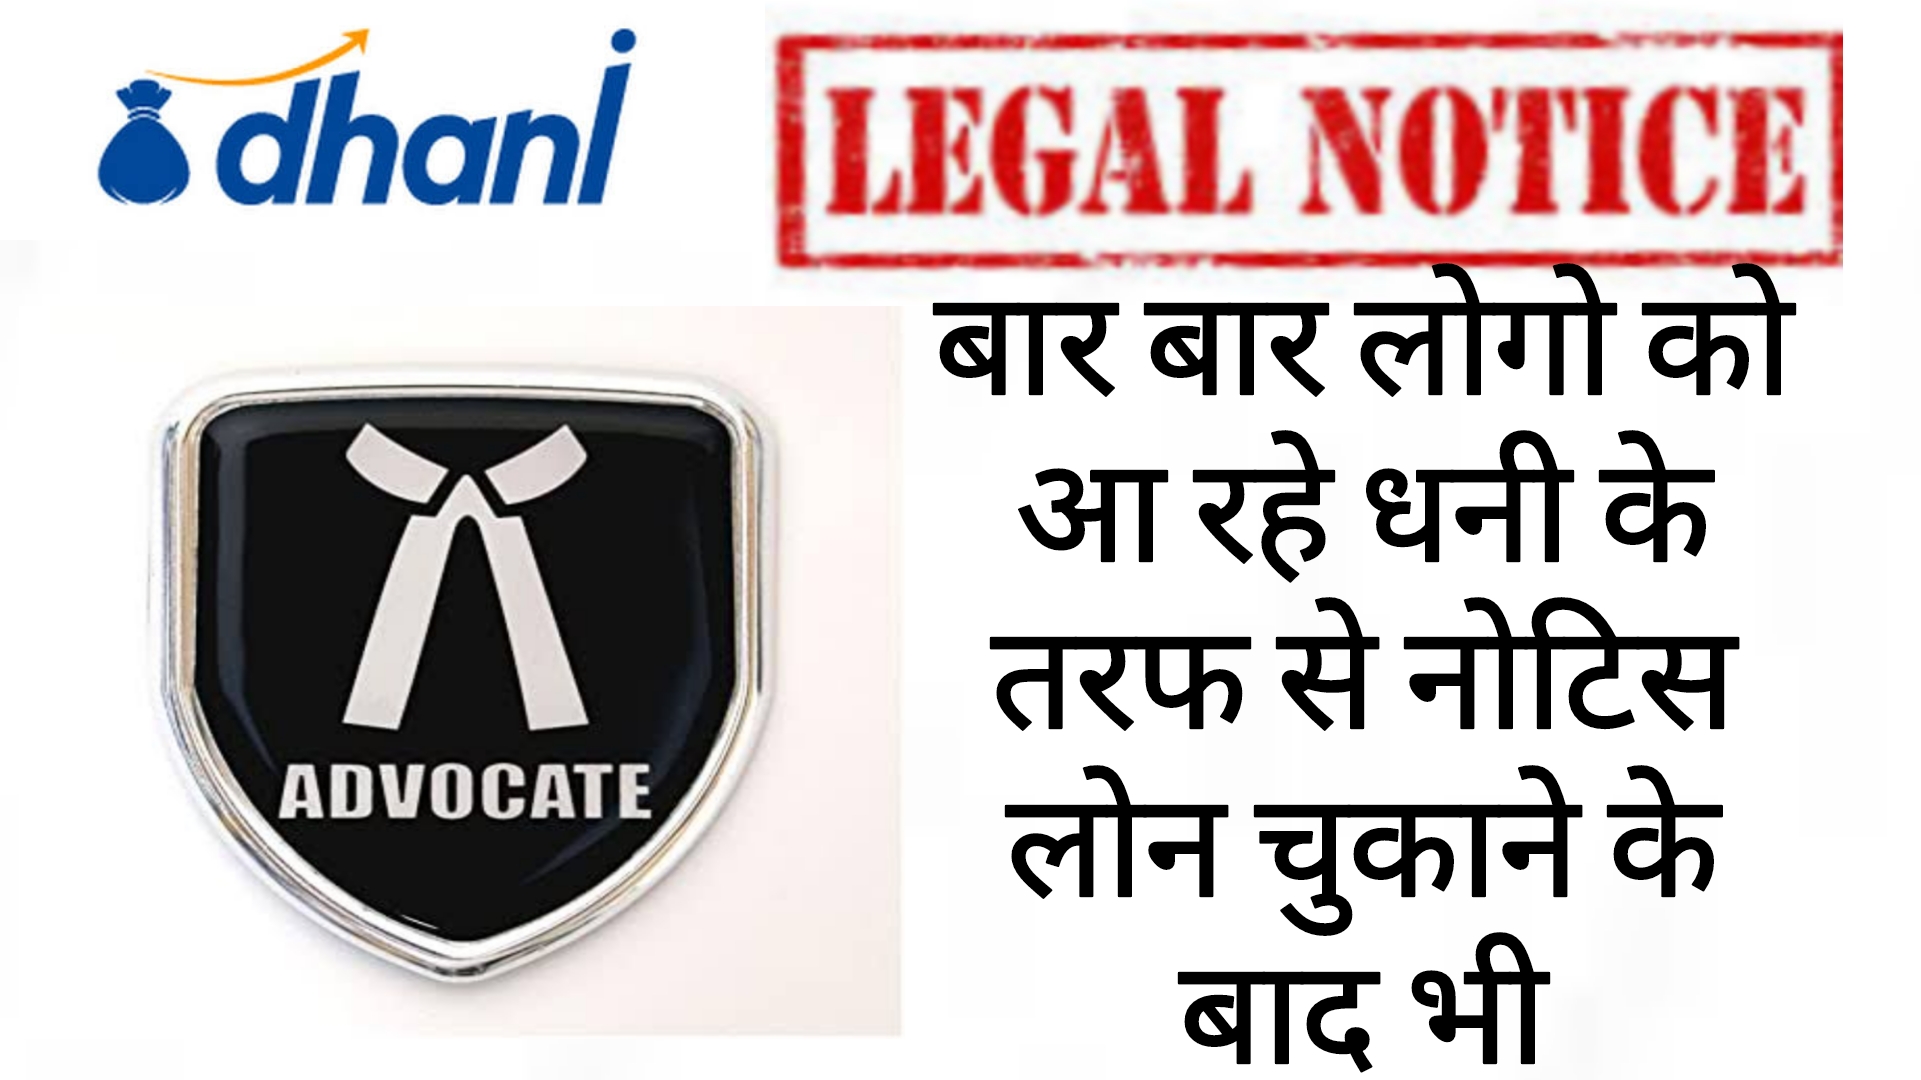 dhani legal notice